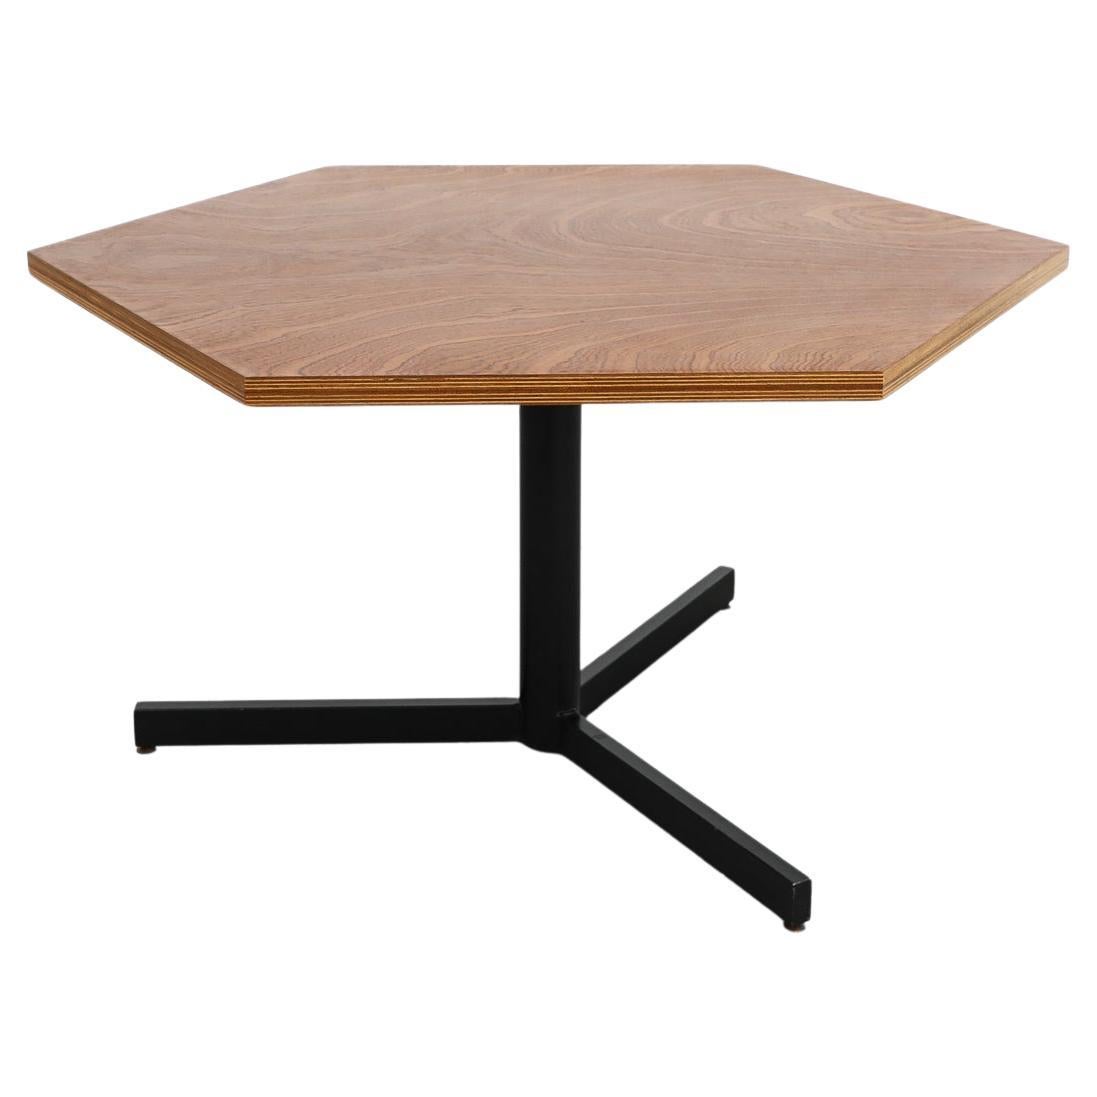 Martin Visser Inspired Hexagon Pedestal Table with Walnut Top and Black Base